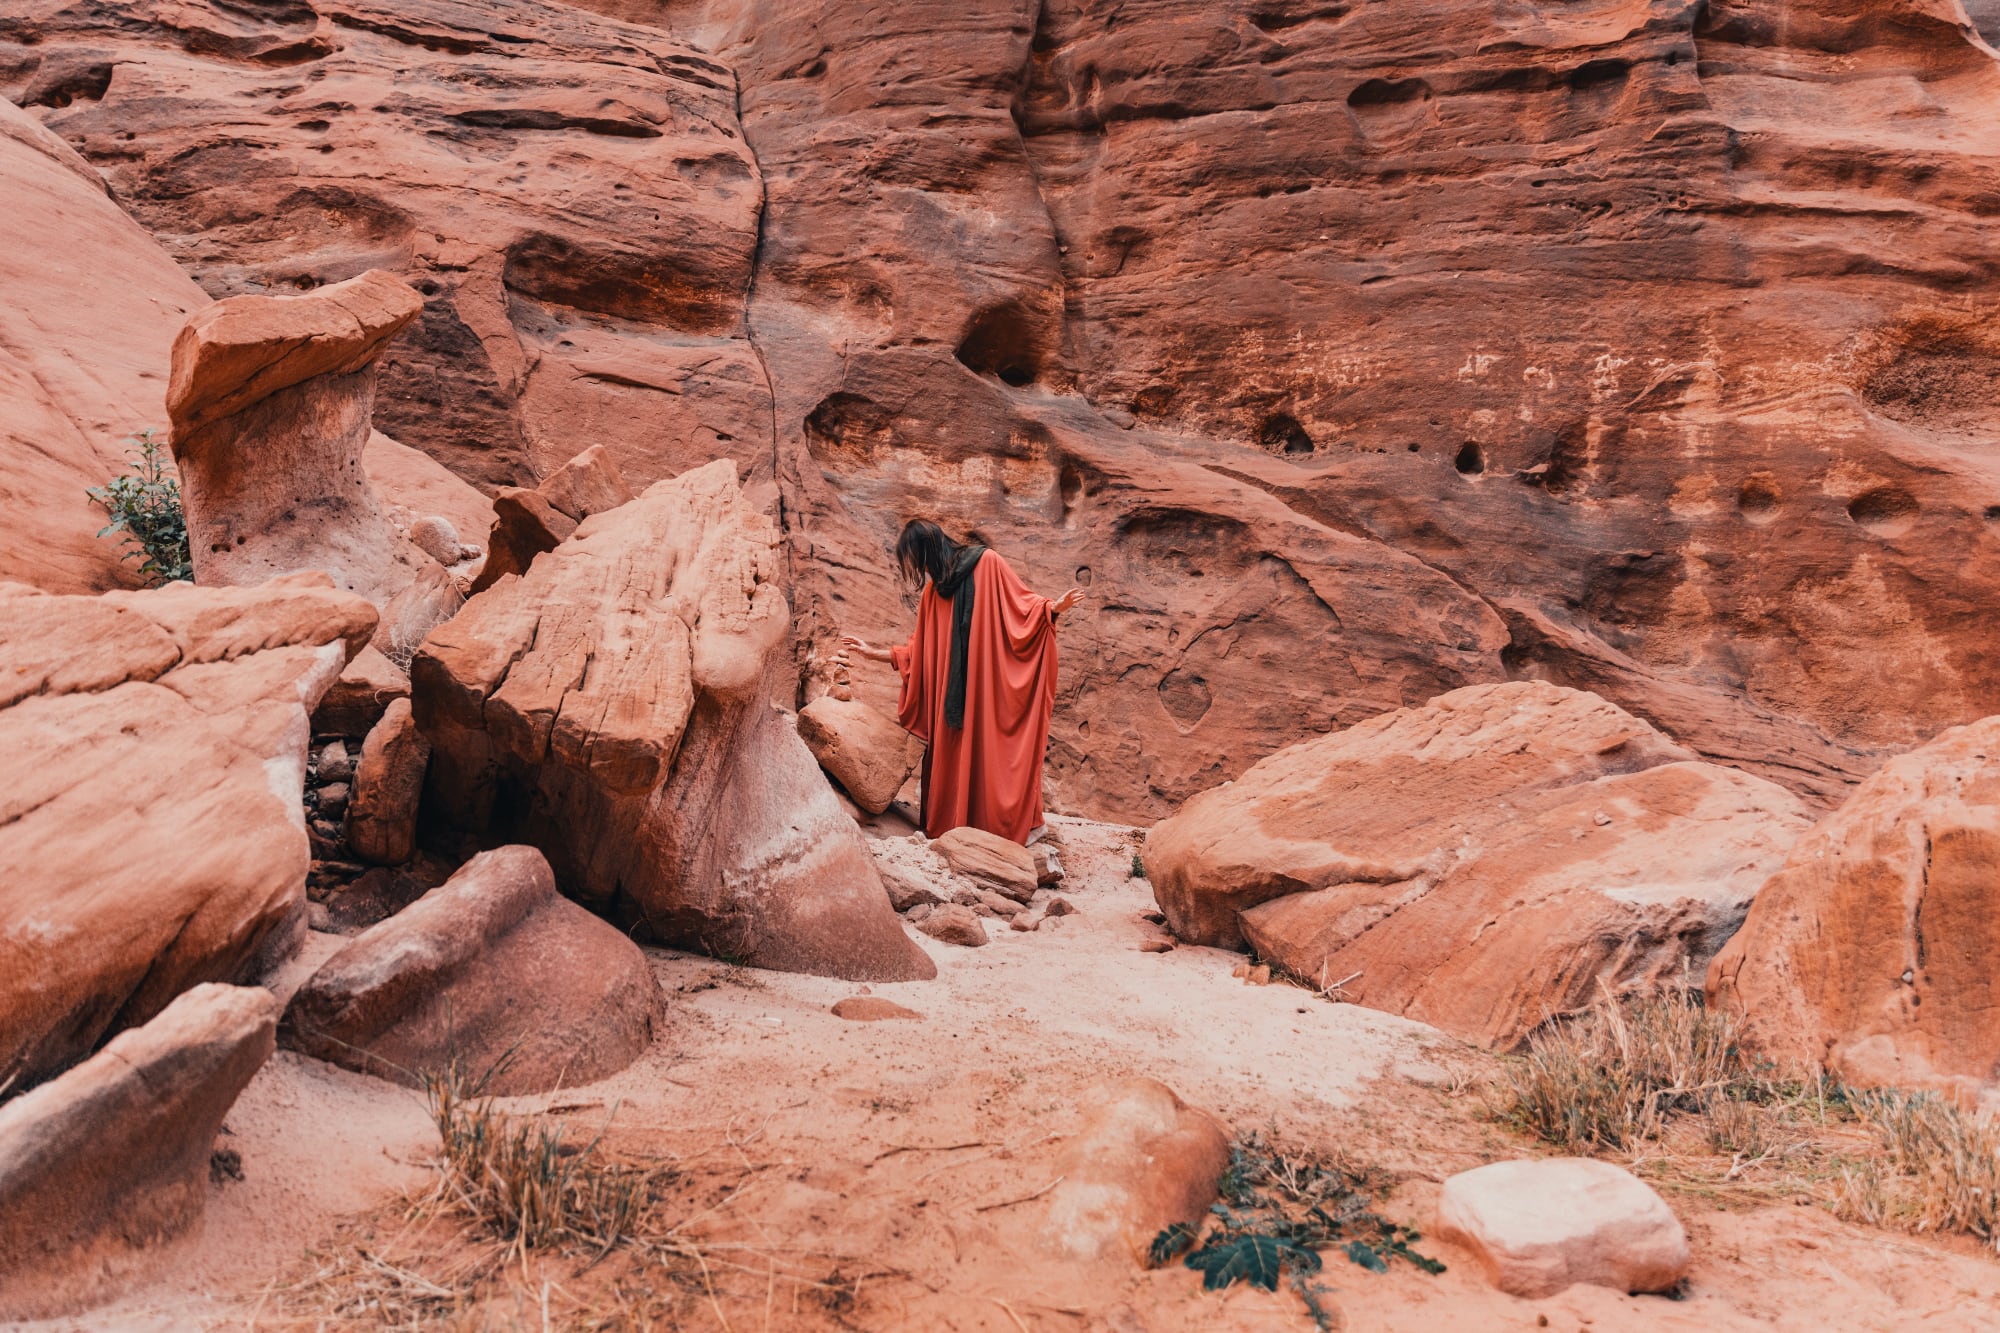 Person in a red robe standing in a rocky landscape